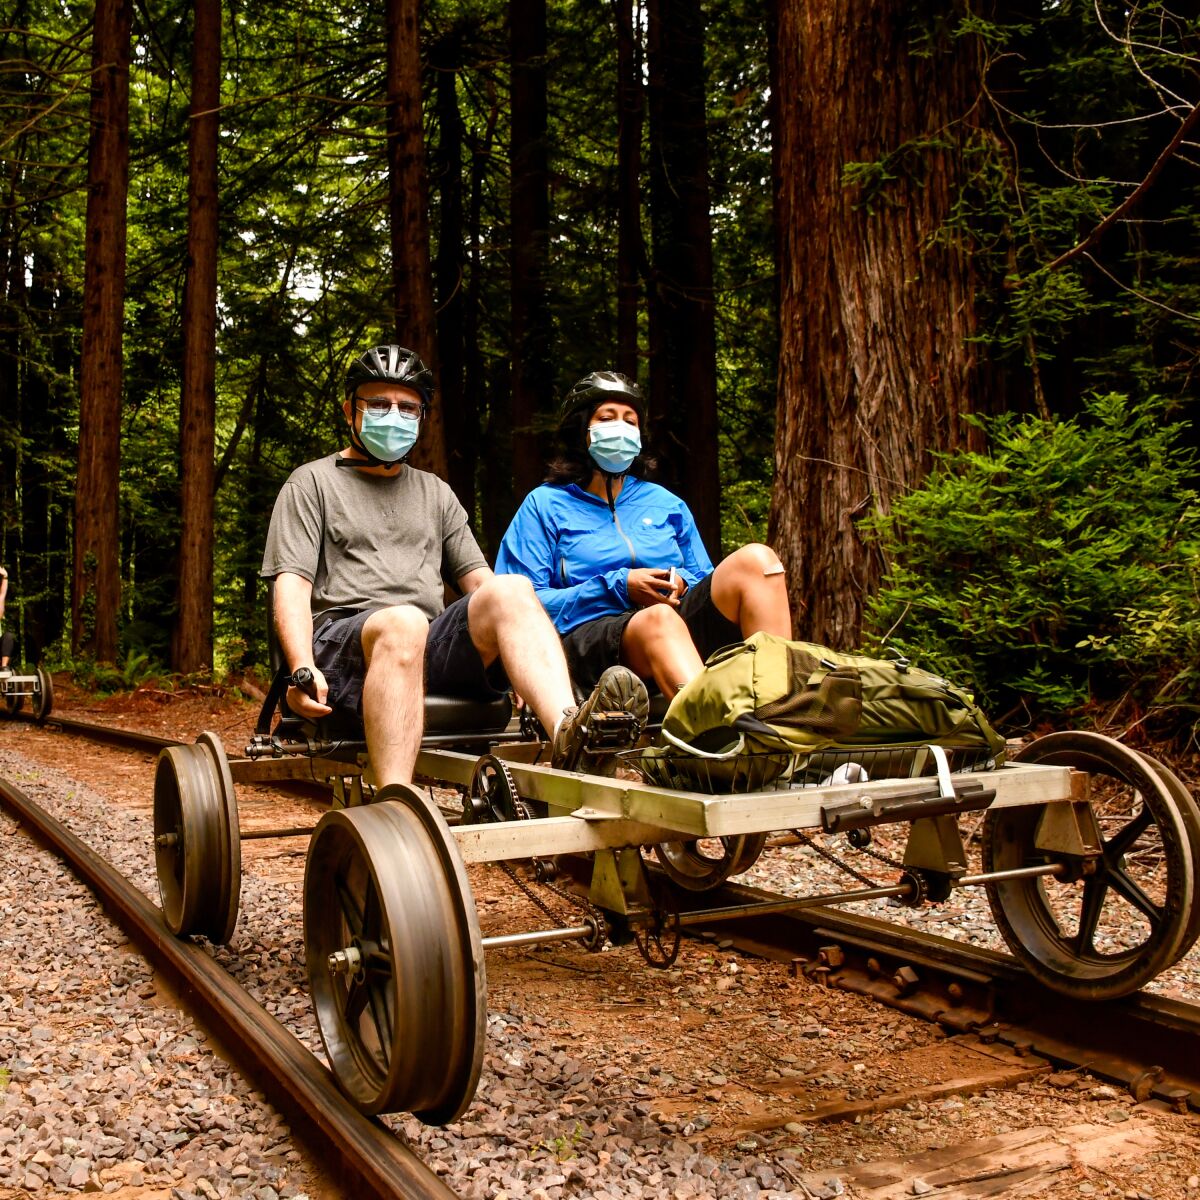 A man and a woman pedal through a forest on a railbike.